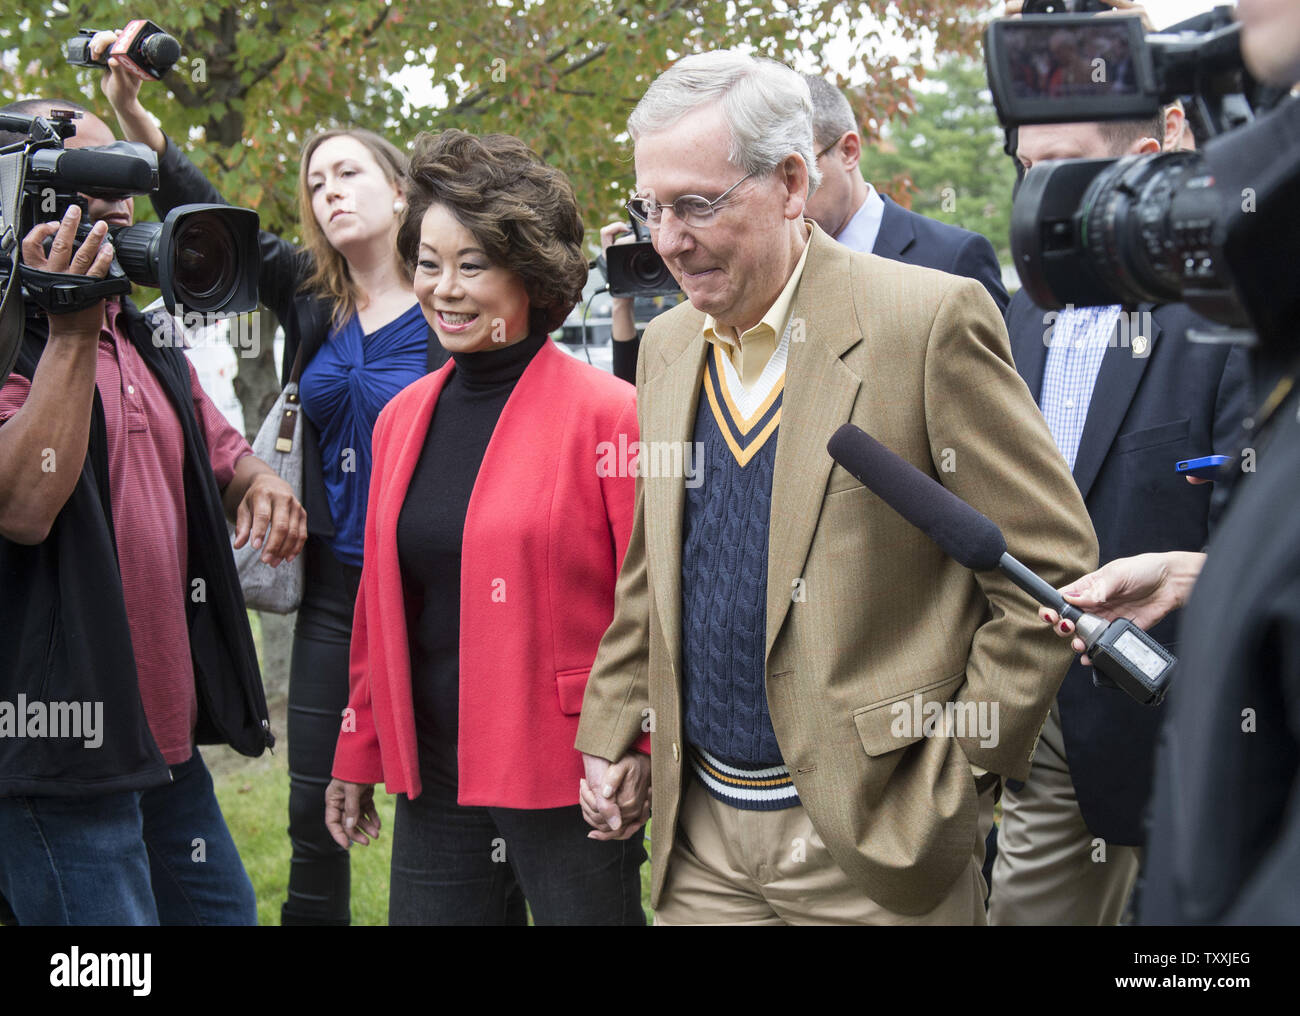 Senate Minority Leader Mitch McConnell, R-Ky, and his wife Elaine Chao leave after voting in Louisville, Kentucky on November 4, 2014.  UPI/Kevin Dietsch Stock Photo